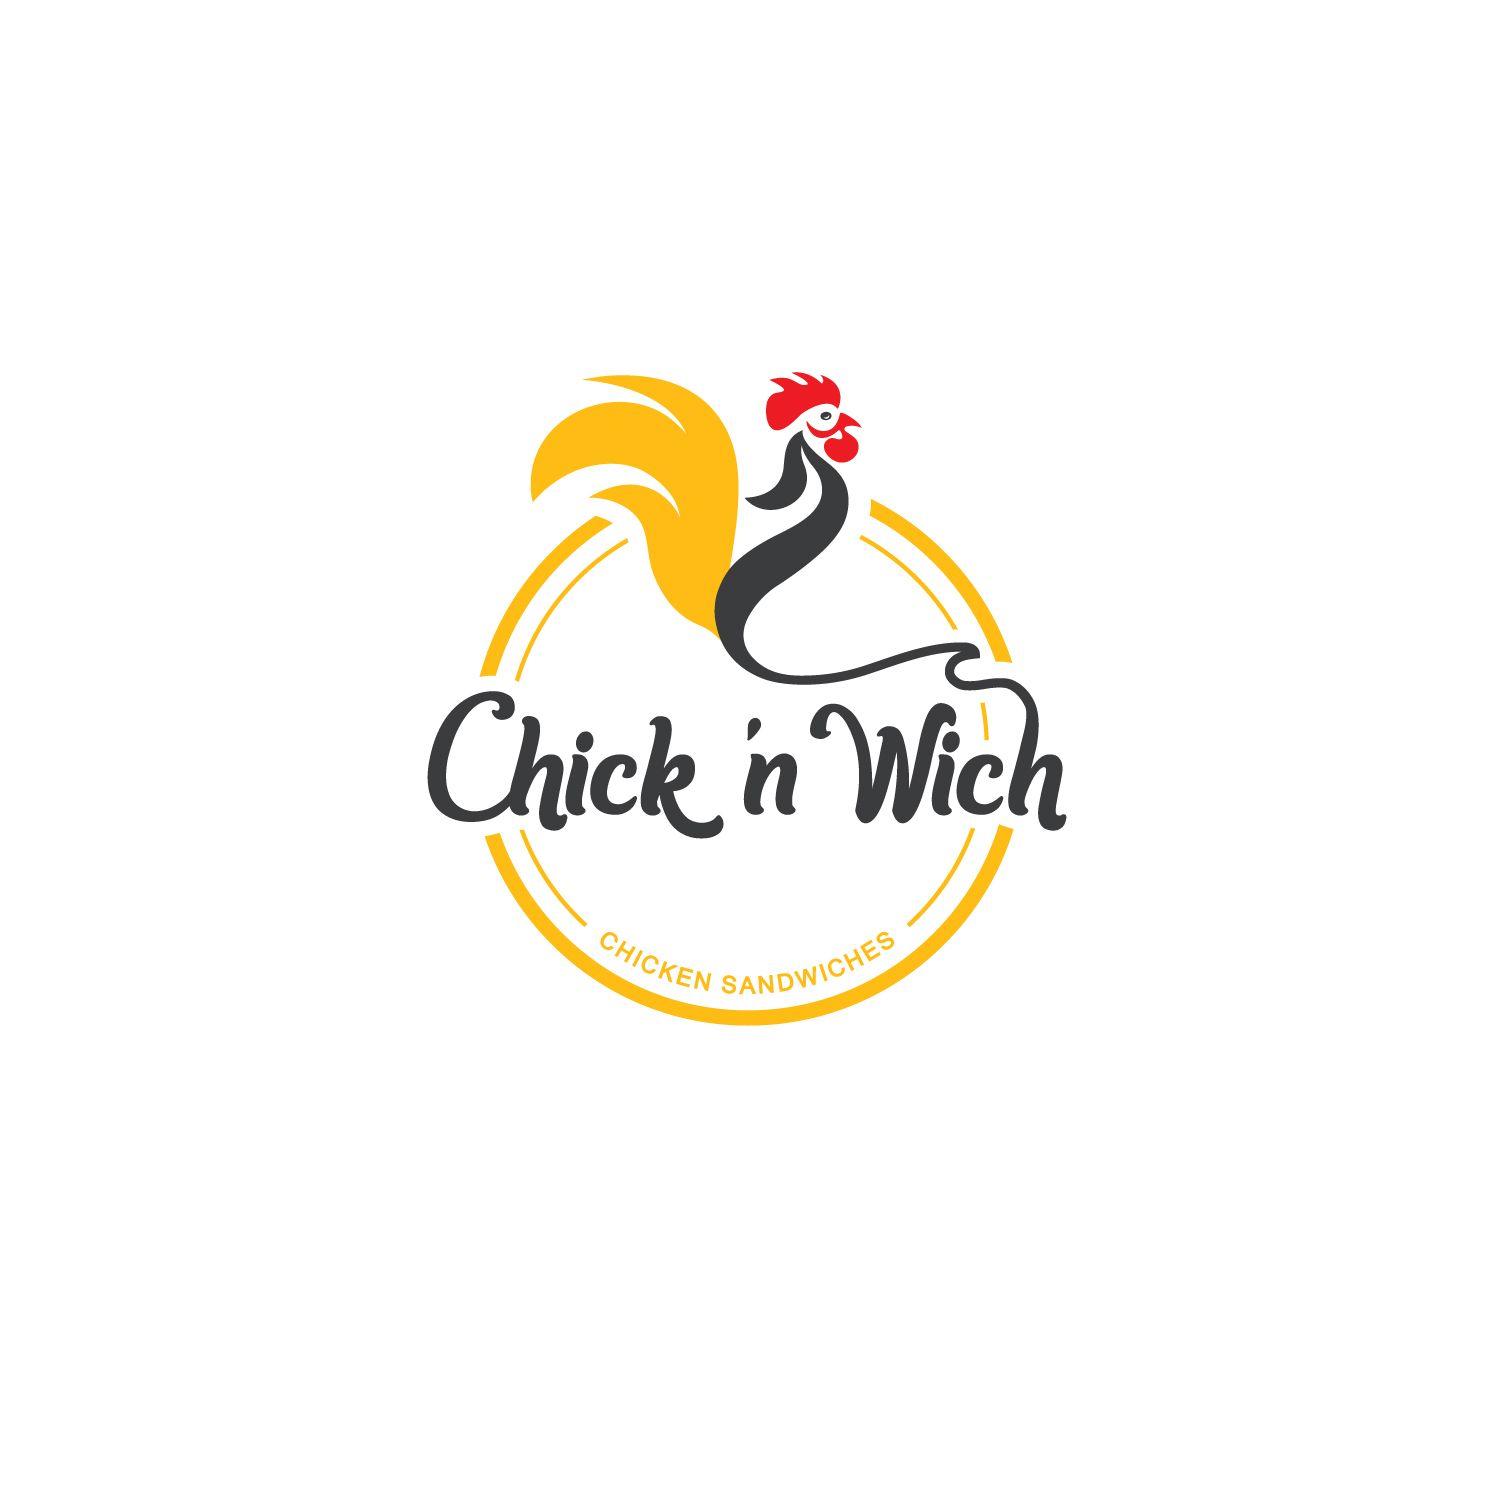 Chick Logo - Modern, Elegant Logo Design for Chick n' Wich or Chick-n-Wich by ...